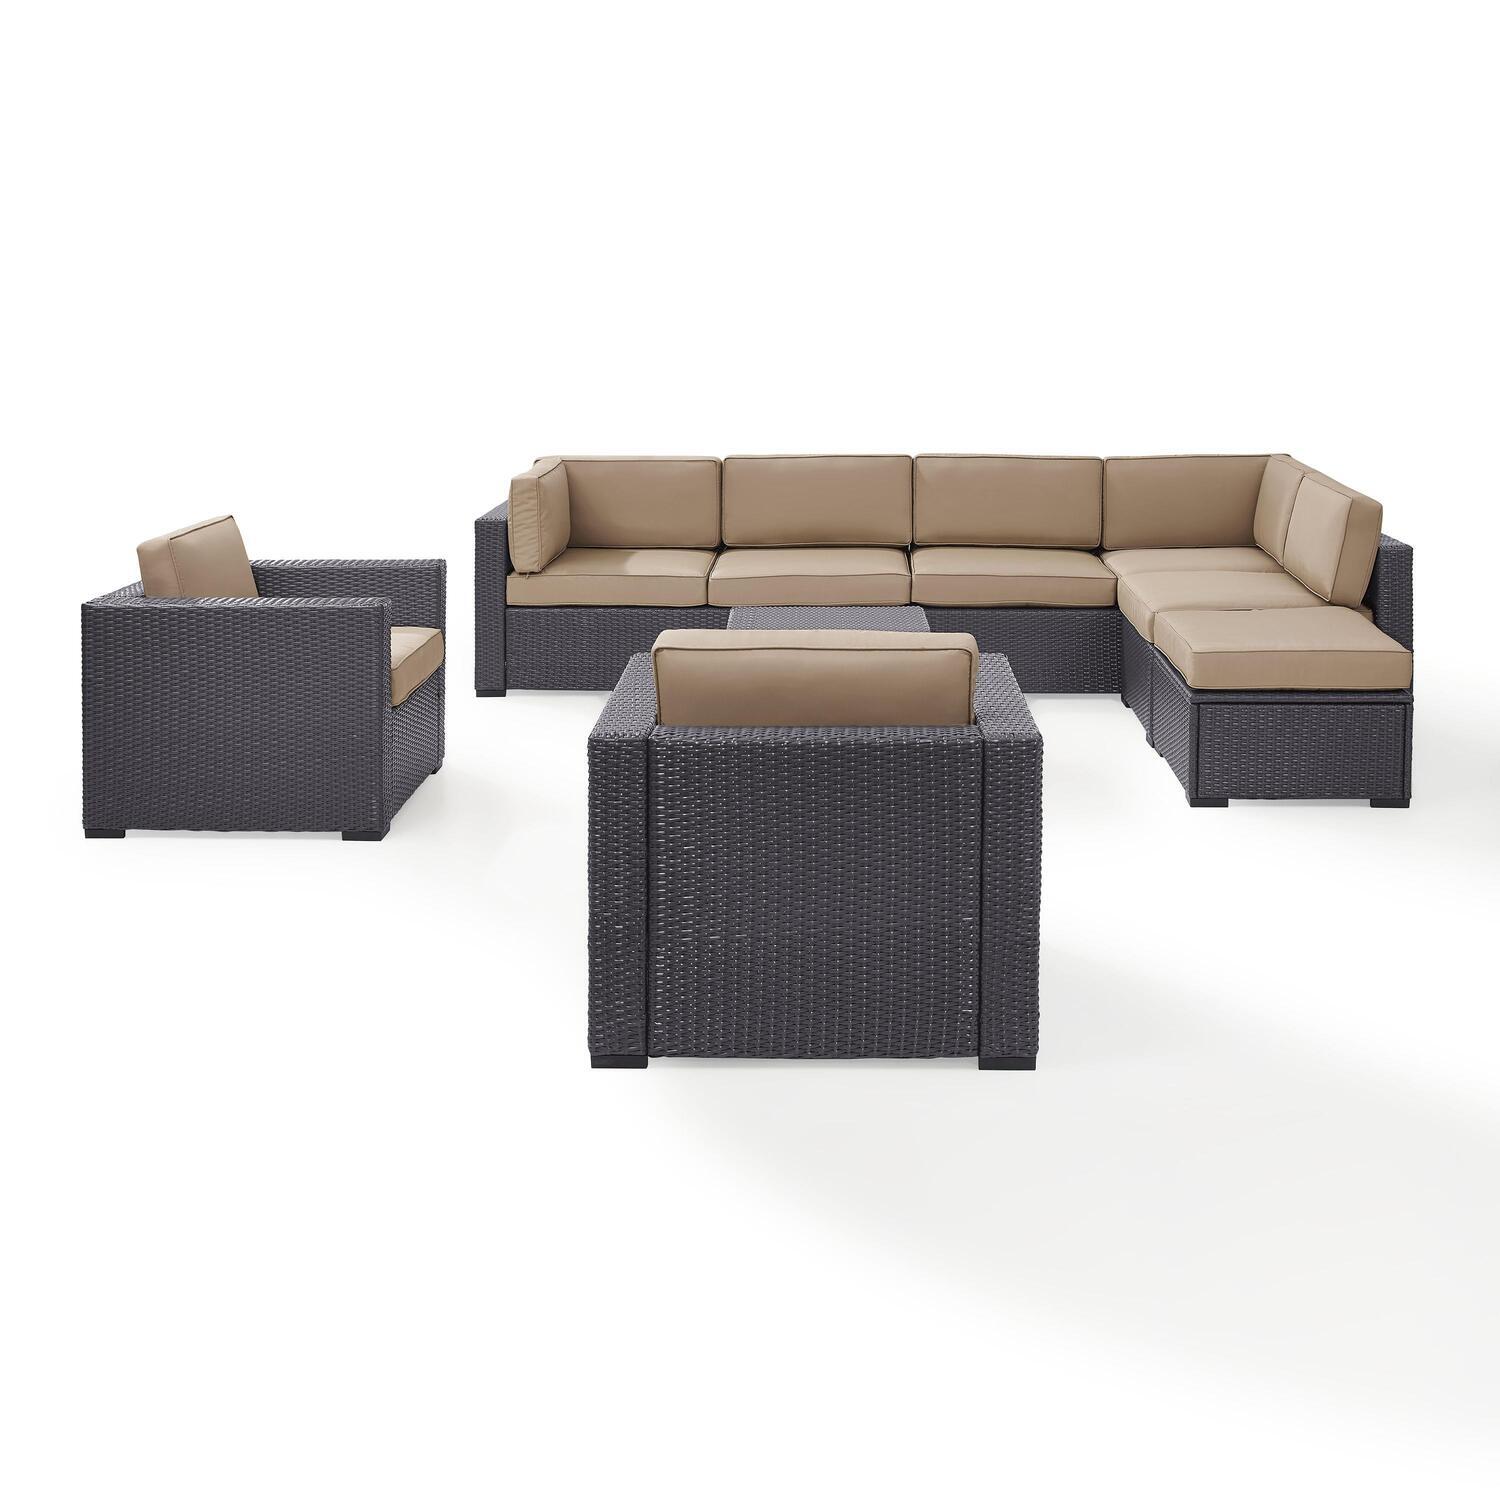 Crosley Furniture Biscayne 7 Piece Metal Patio Sectional Set in Brown/Mocha - image 1 of 4